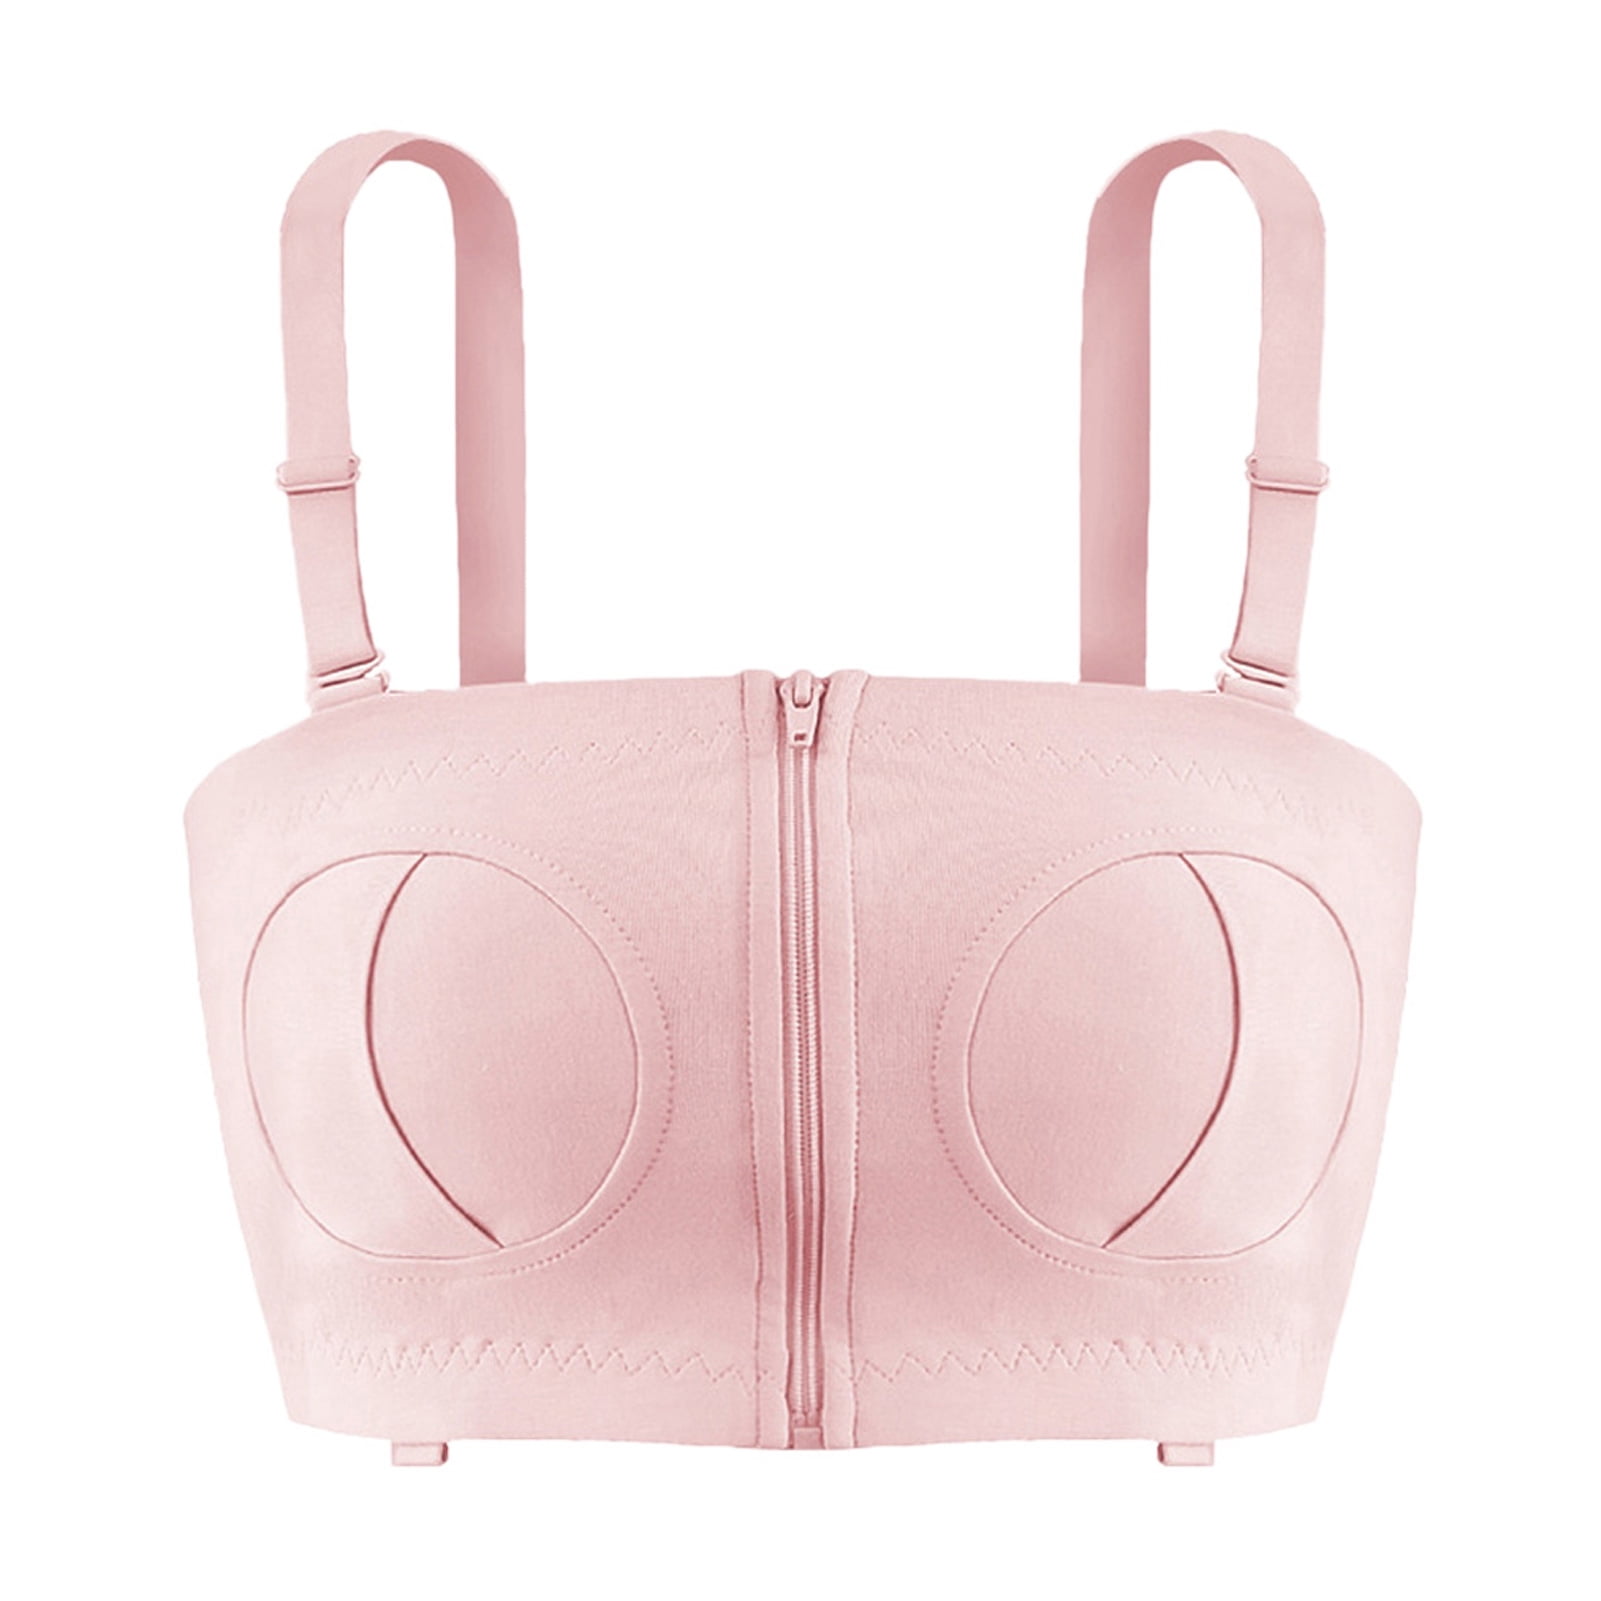 Simple Wishes Hands Free Pumping Bustier L/XL/XXL in Pink